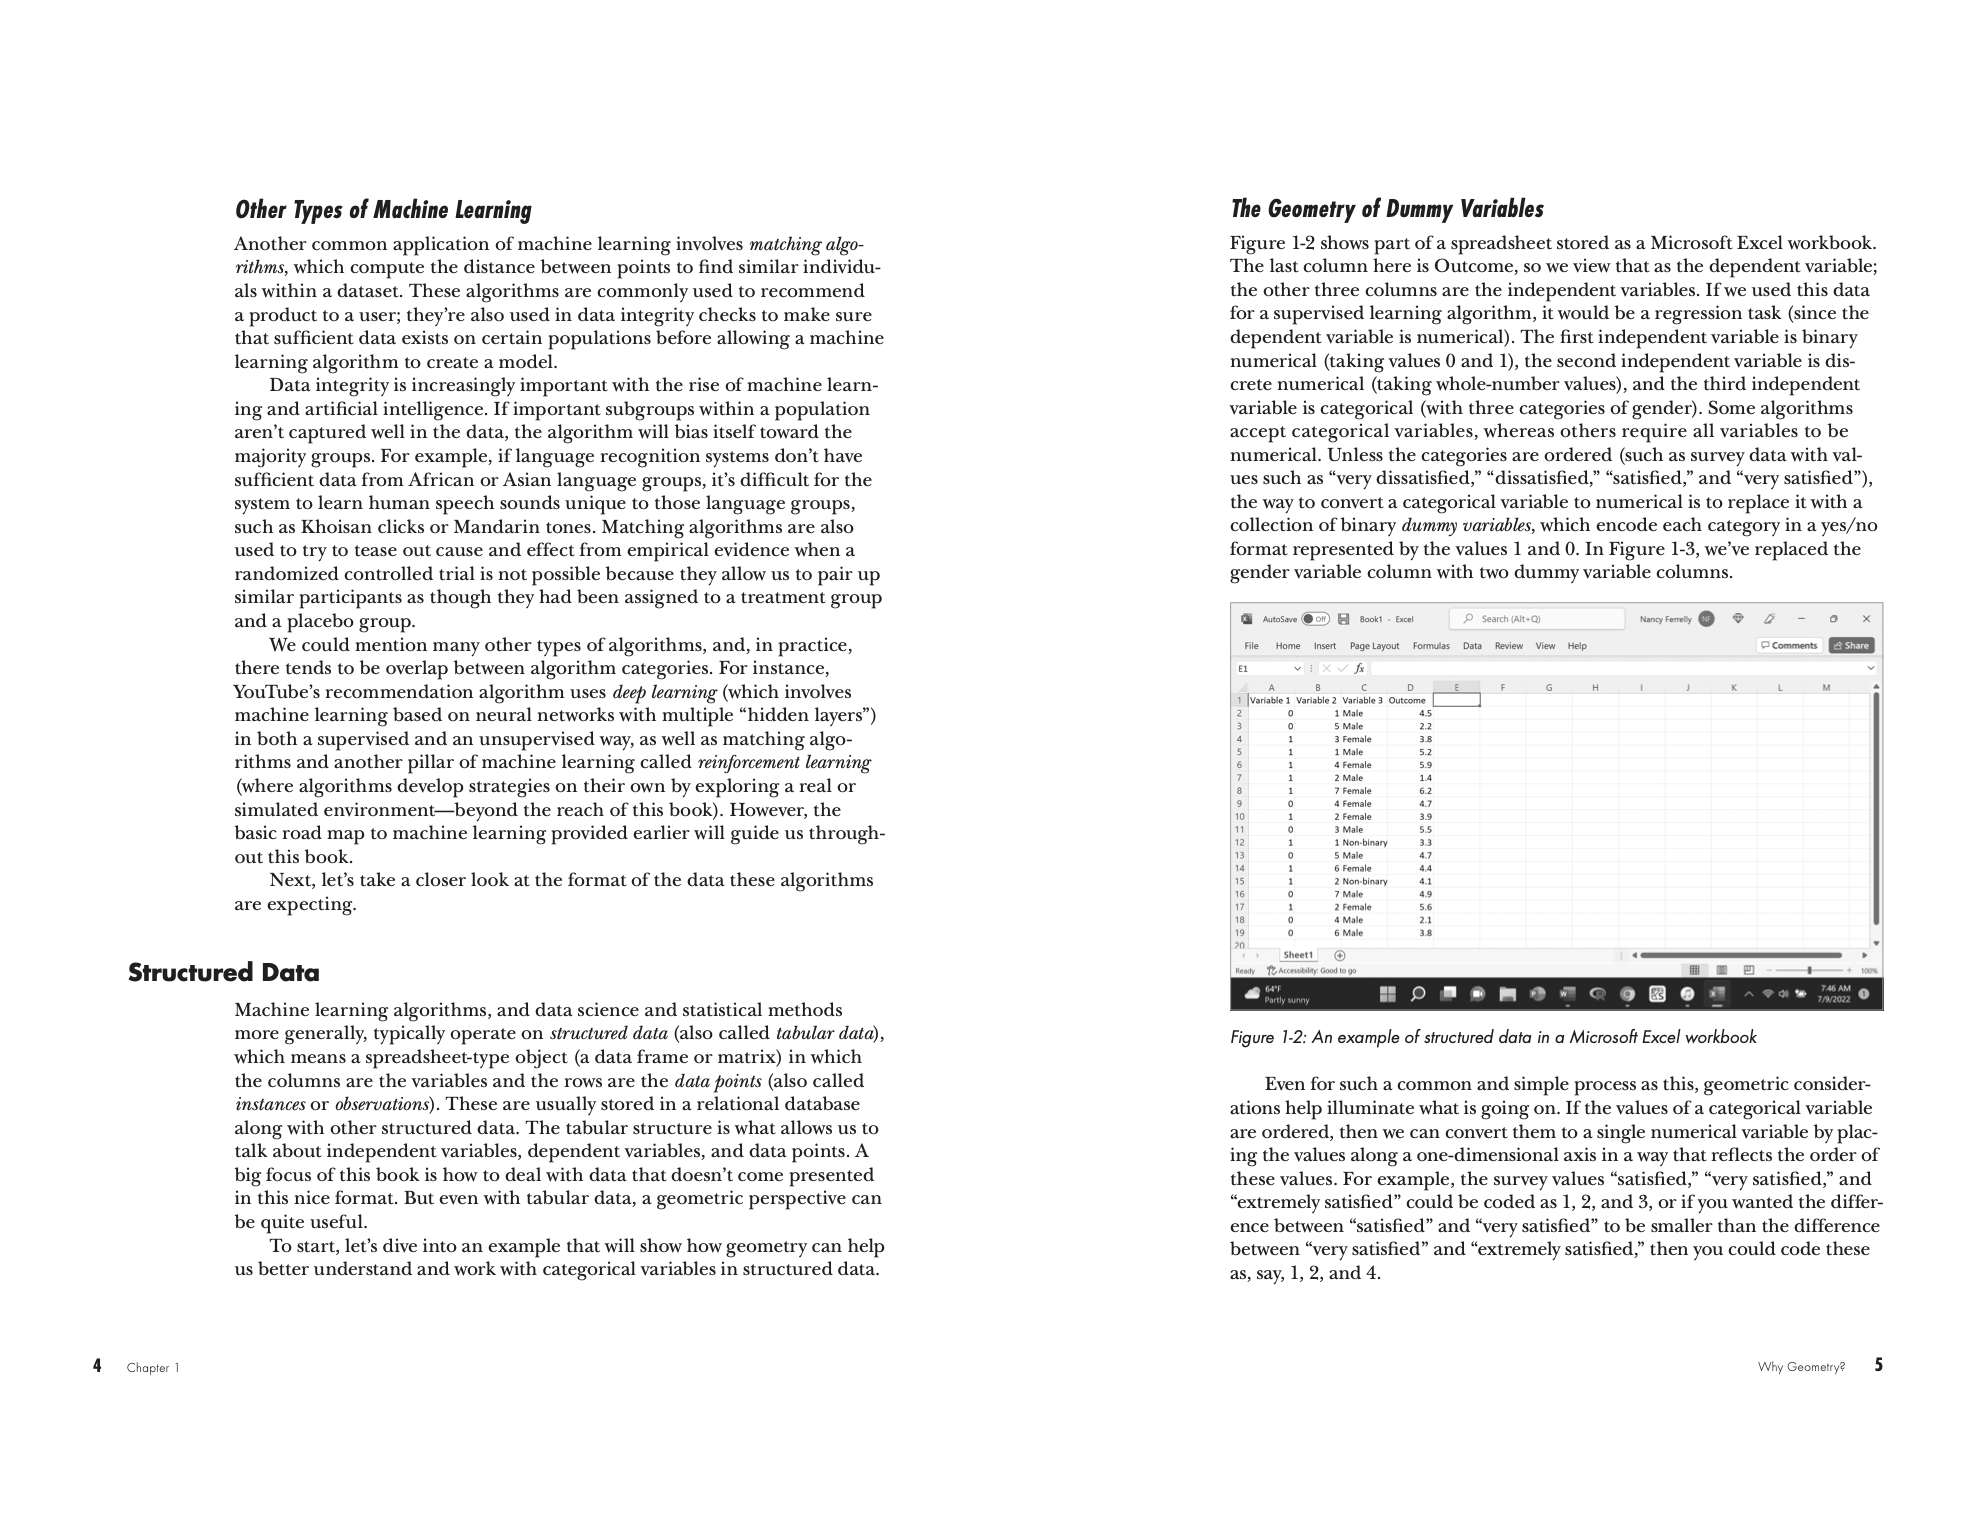 Shape of Data pages 4-5